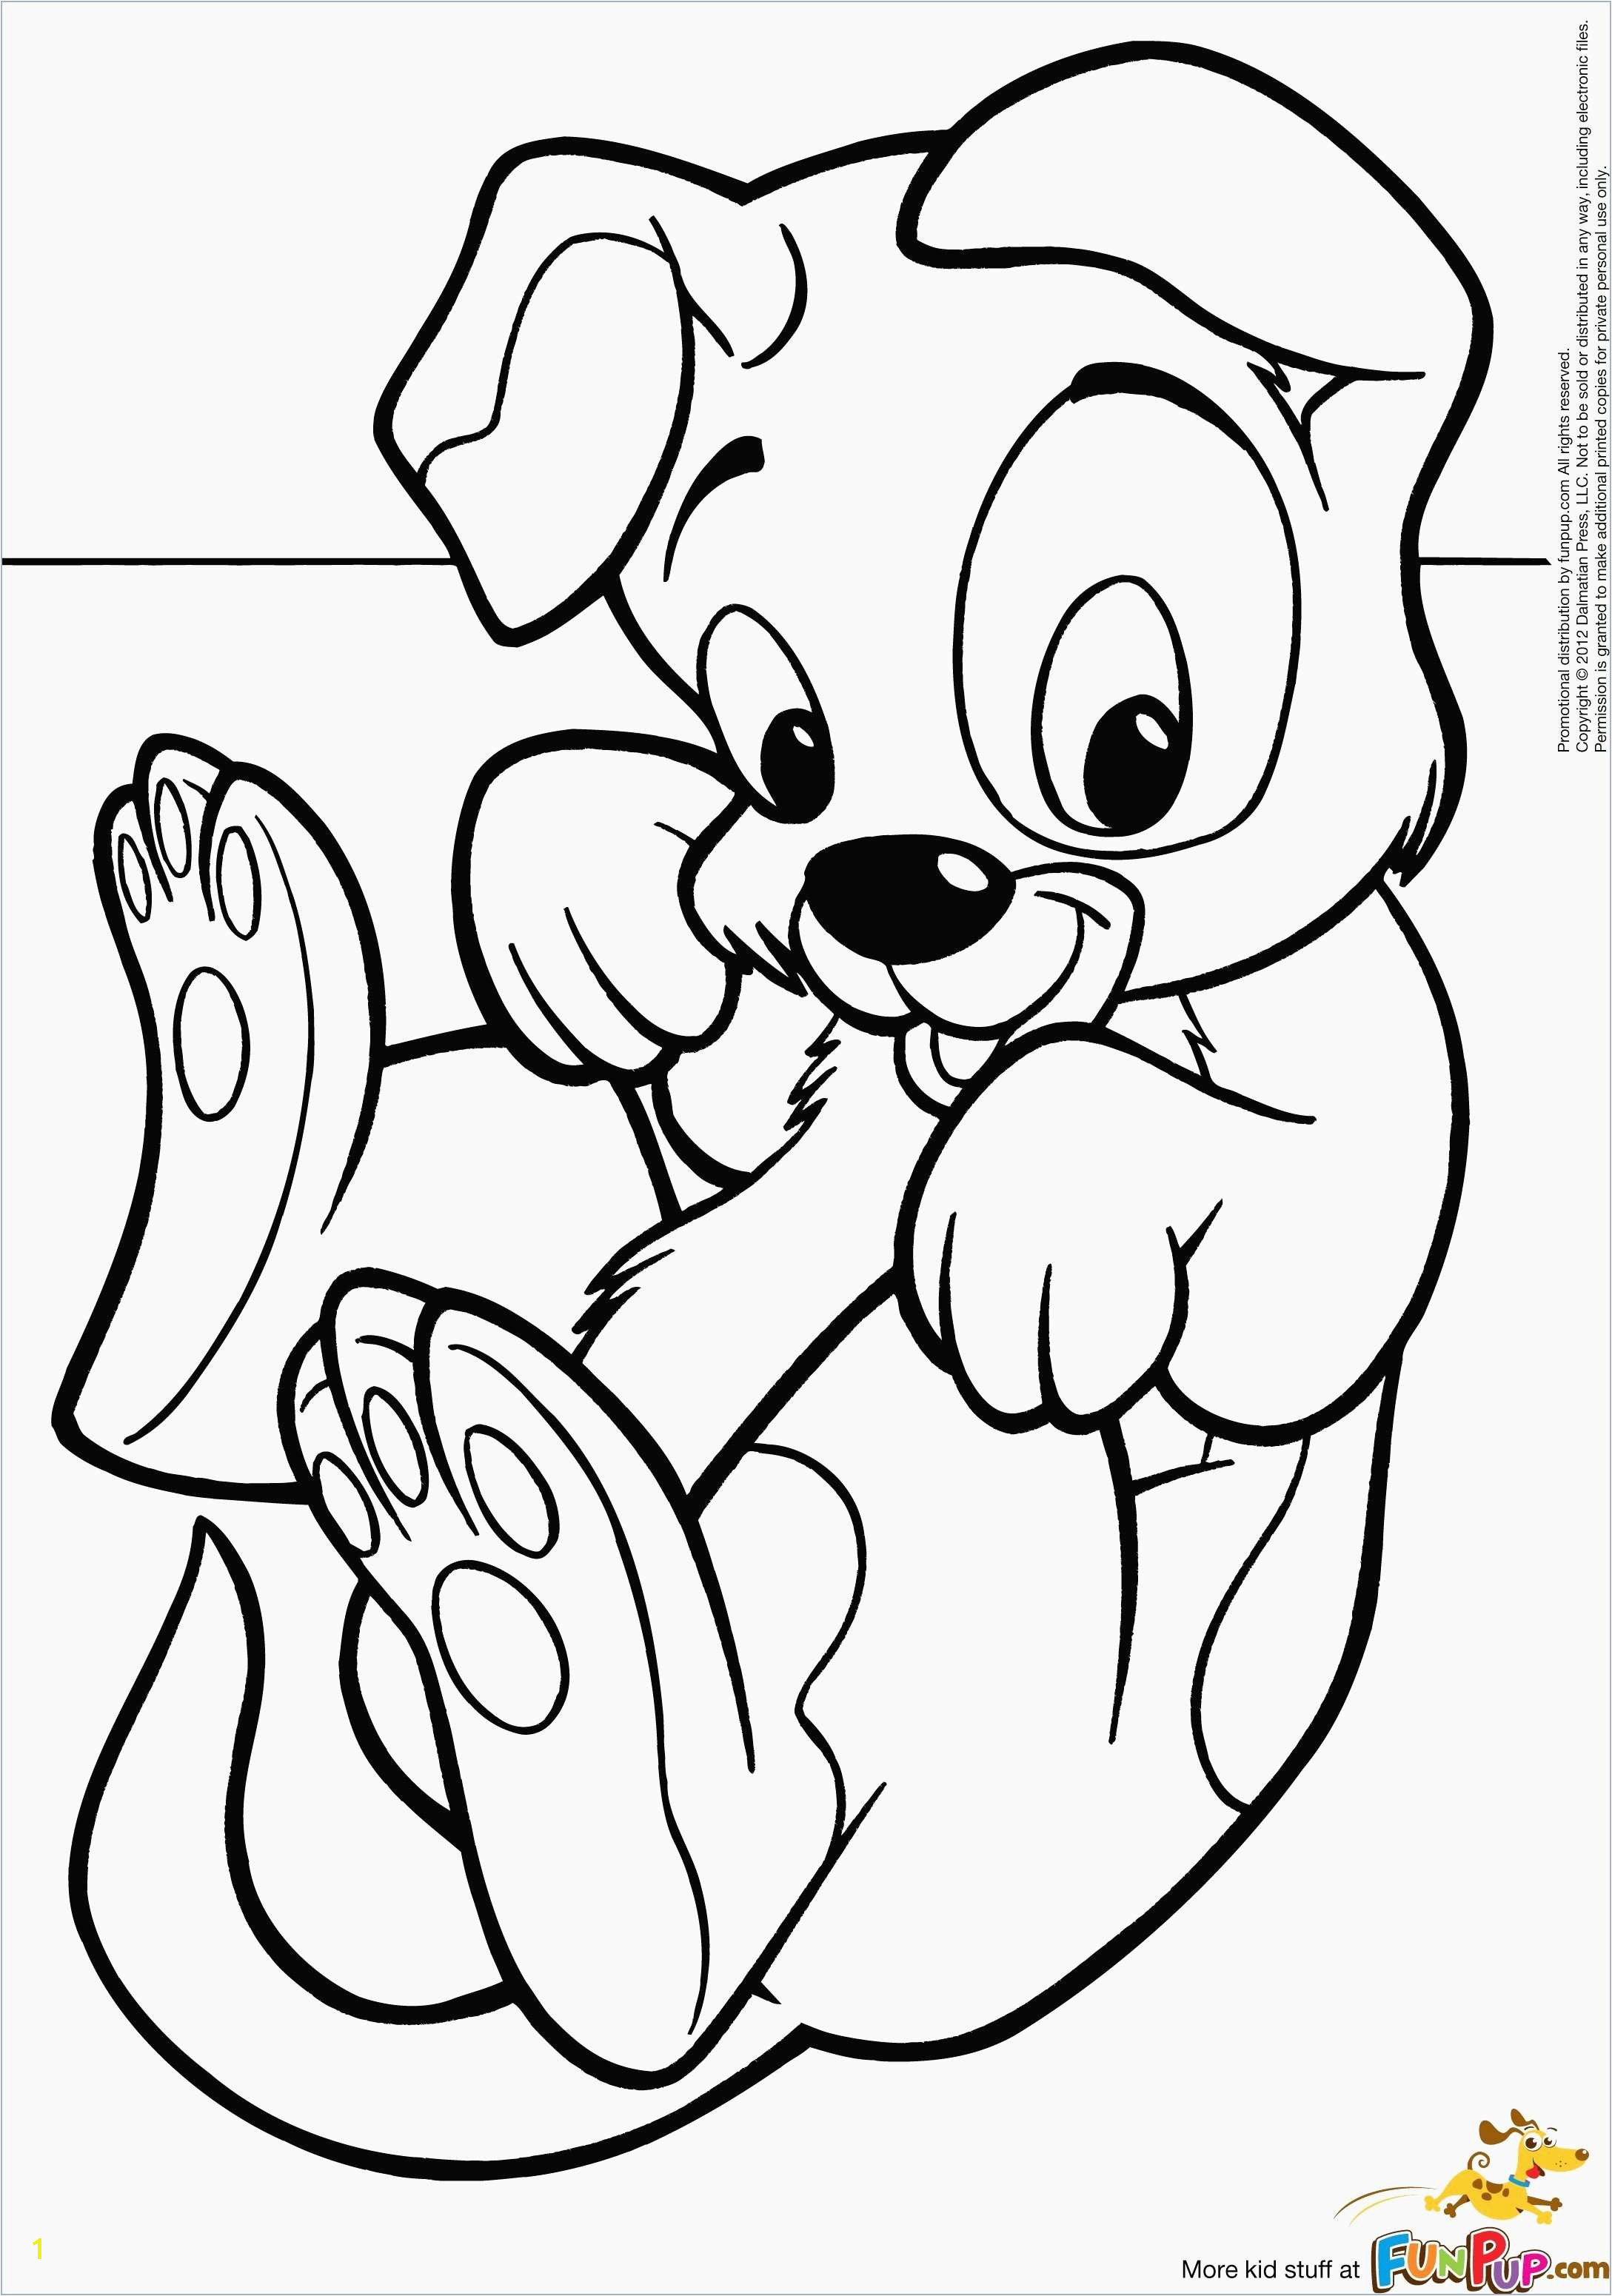 Puppy Dog Pals Coloring Pages Free With Great Printable